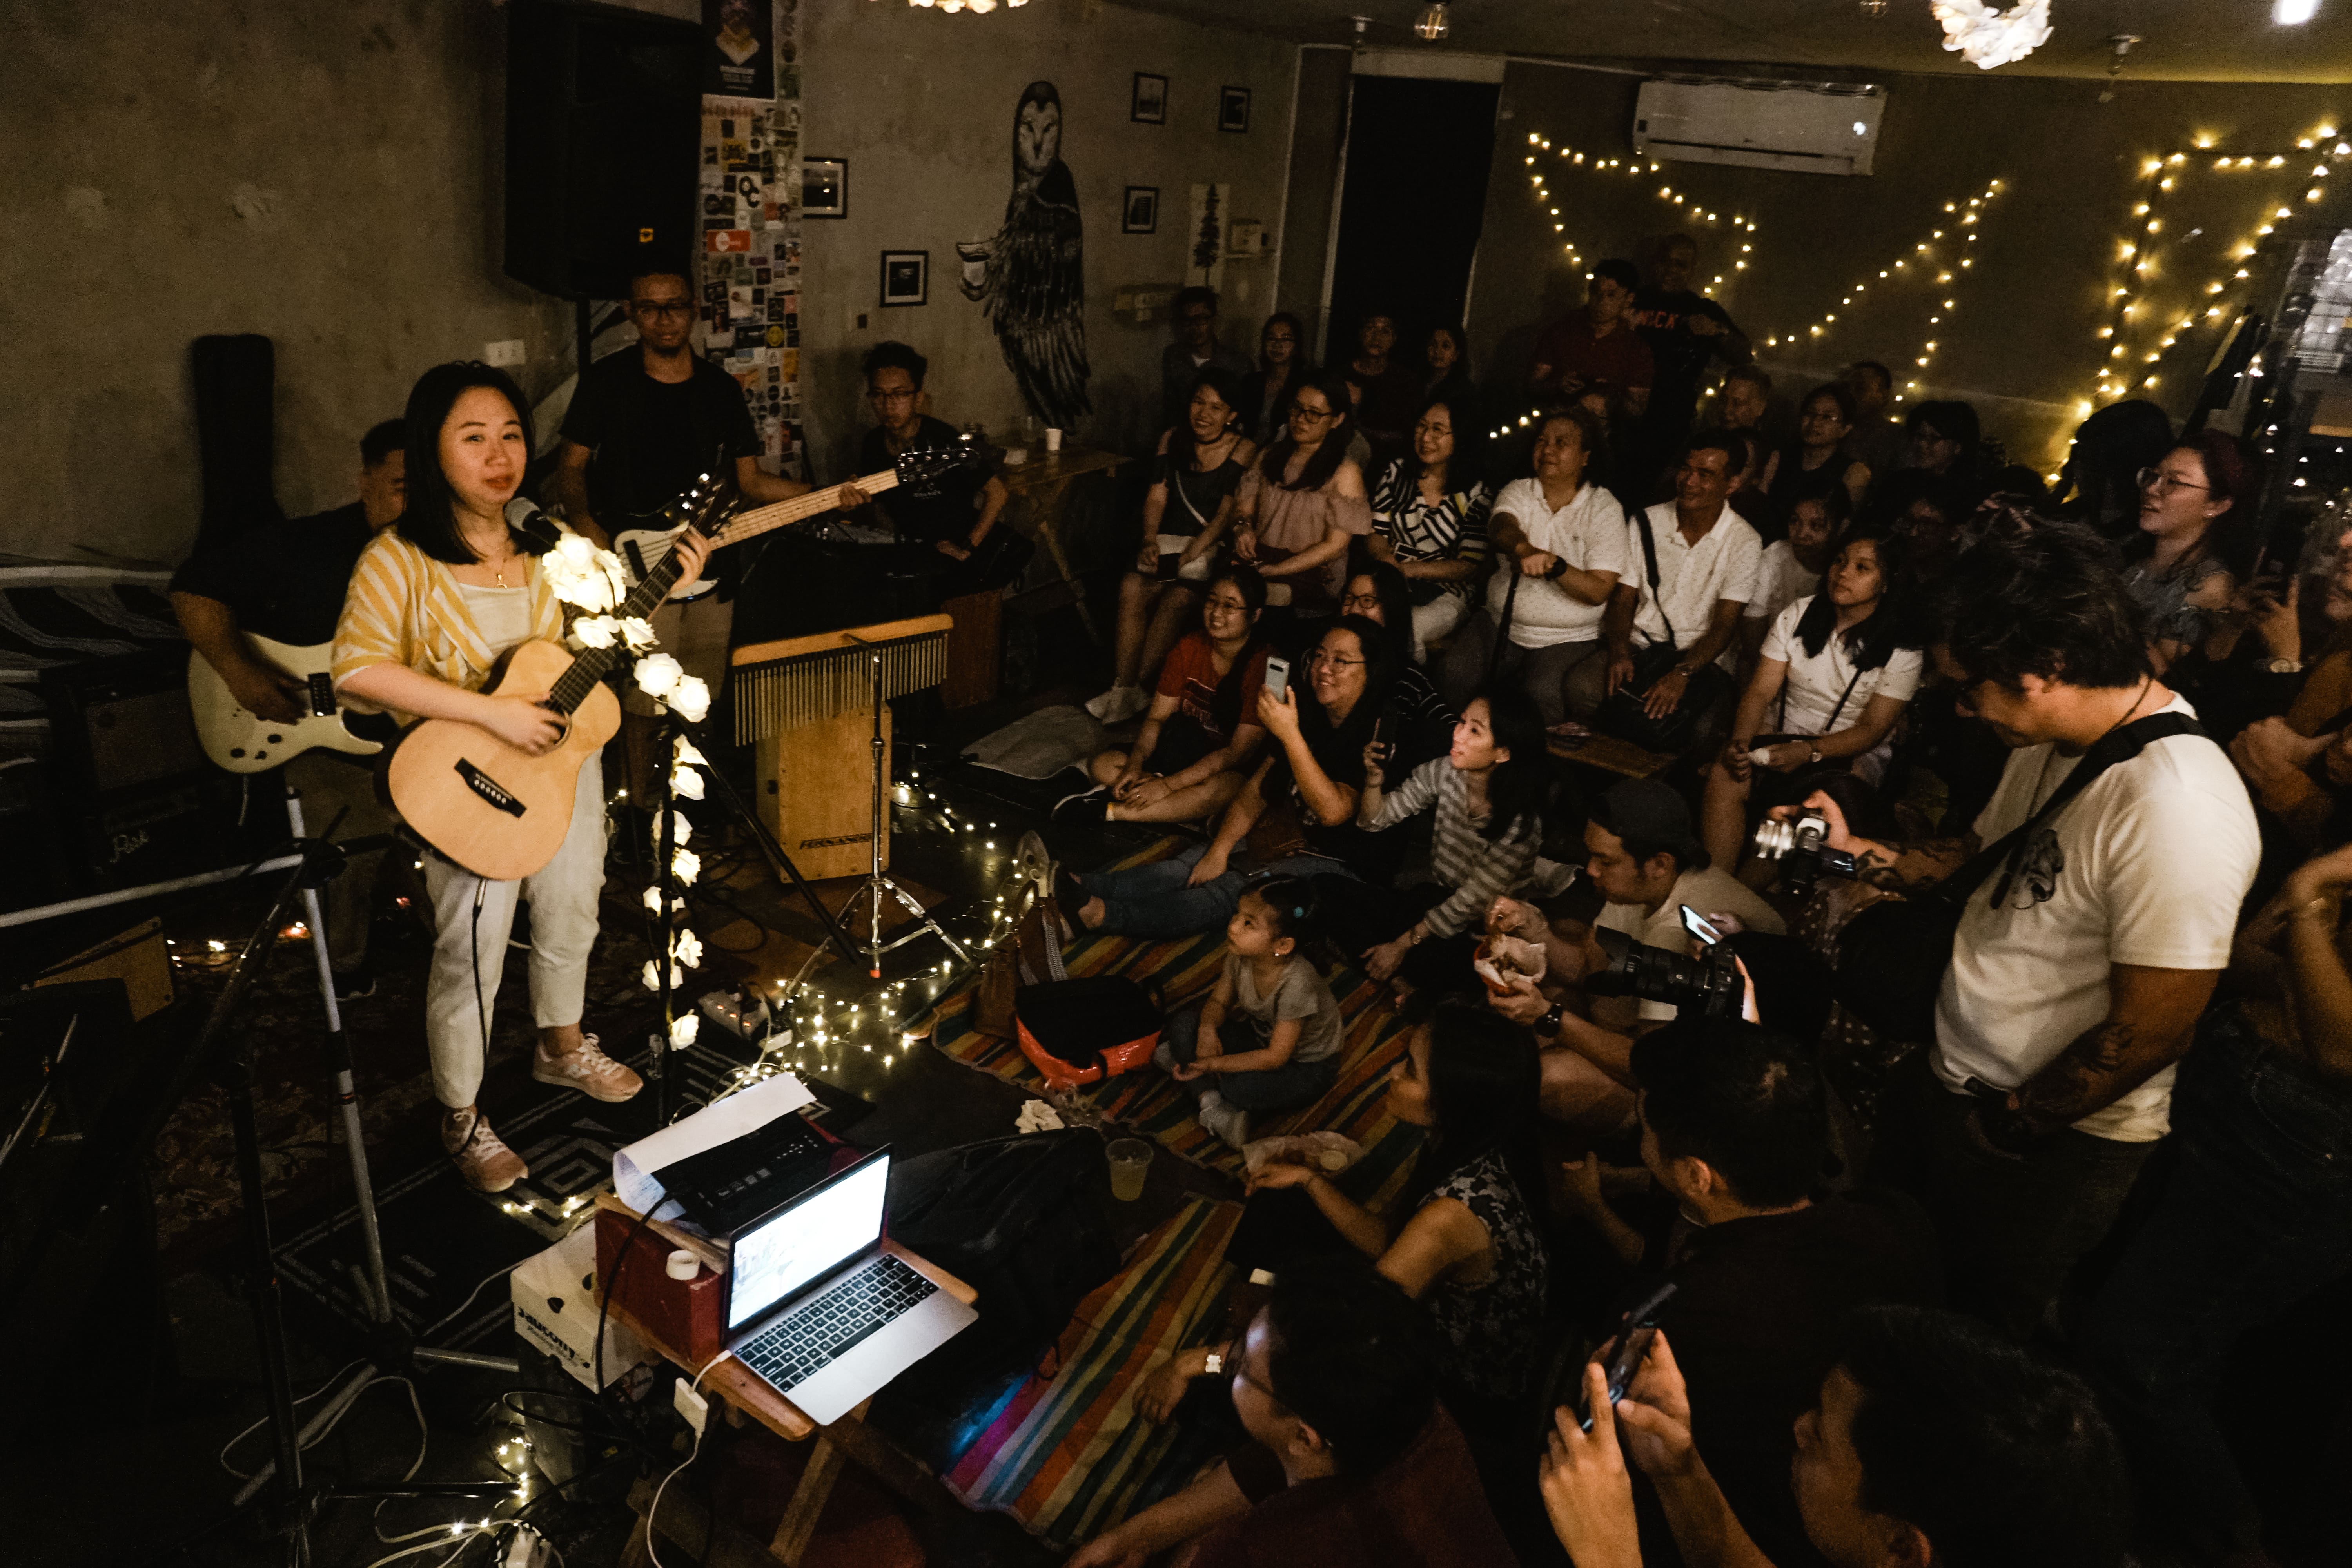 Denice Lao Launches First Single "Just Got Home". Congratulations!